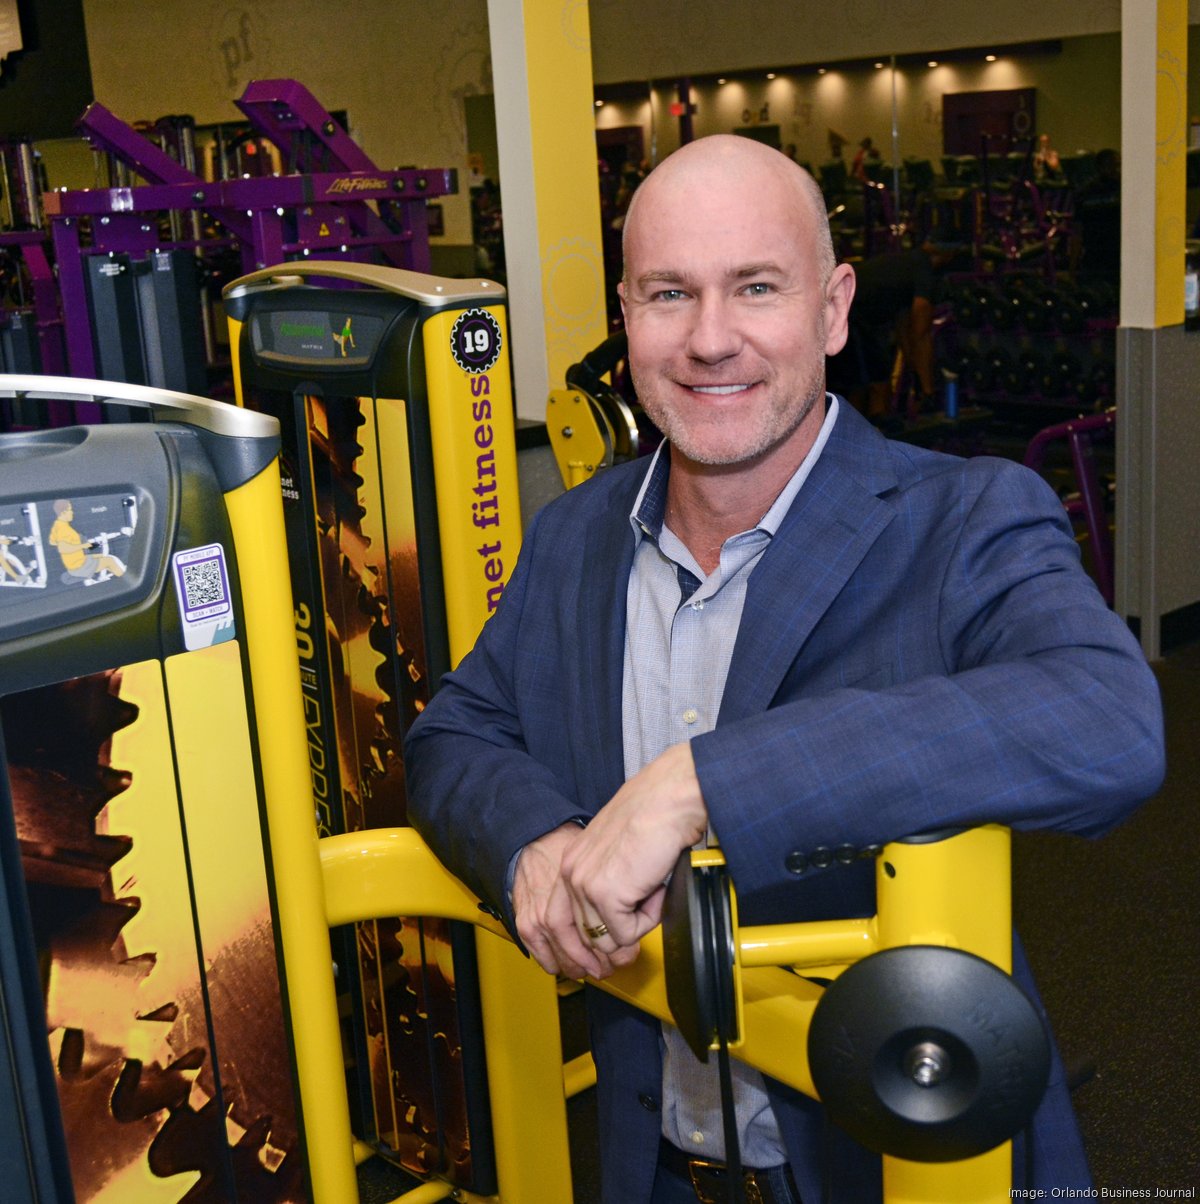 Planet Fitness parent Sunshine Fitness Growth Holdings hits growth  milestone with 100th club, more on the way - Orlando Business Journal